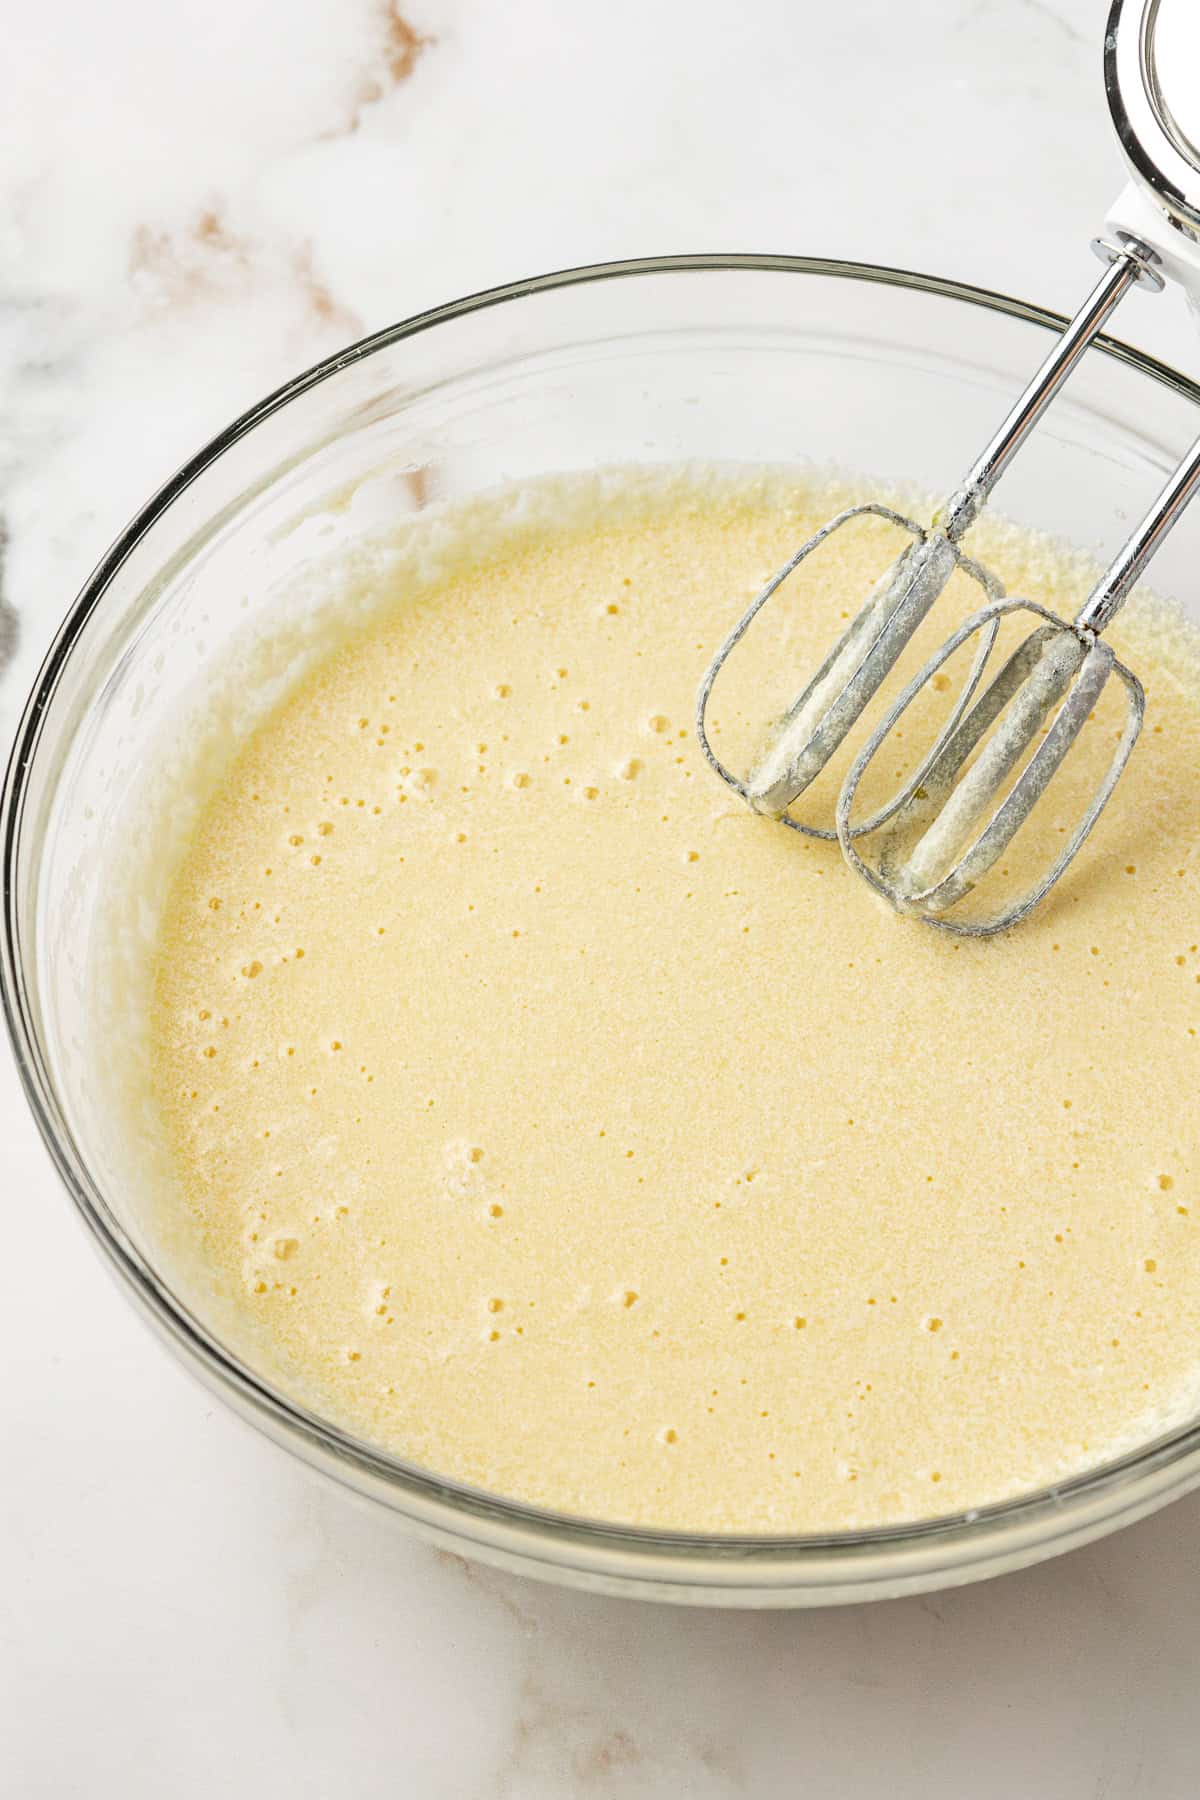 wet ingredients for vanilla cake in a clear glass bowl with an electric mixer leaning on the side of the bowl